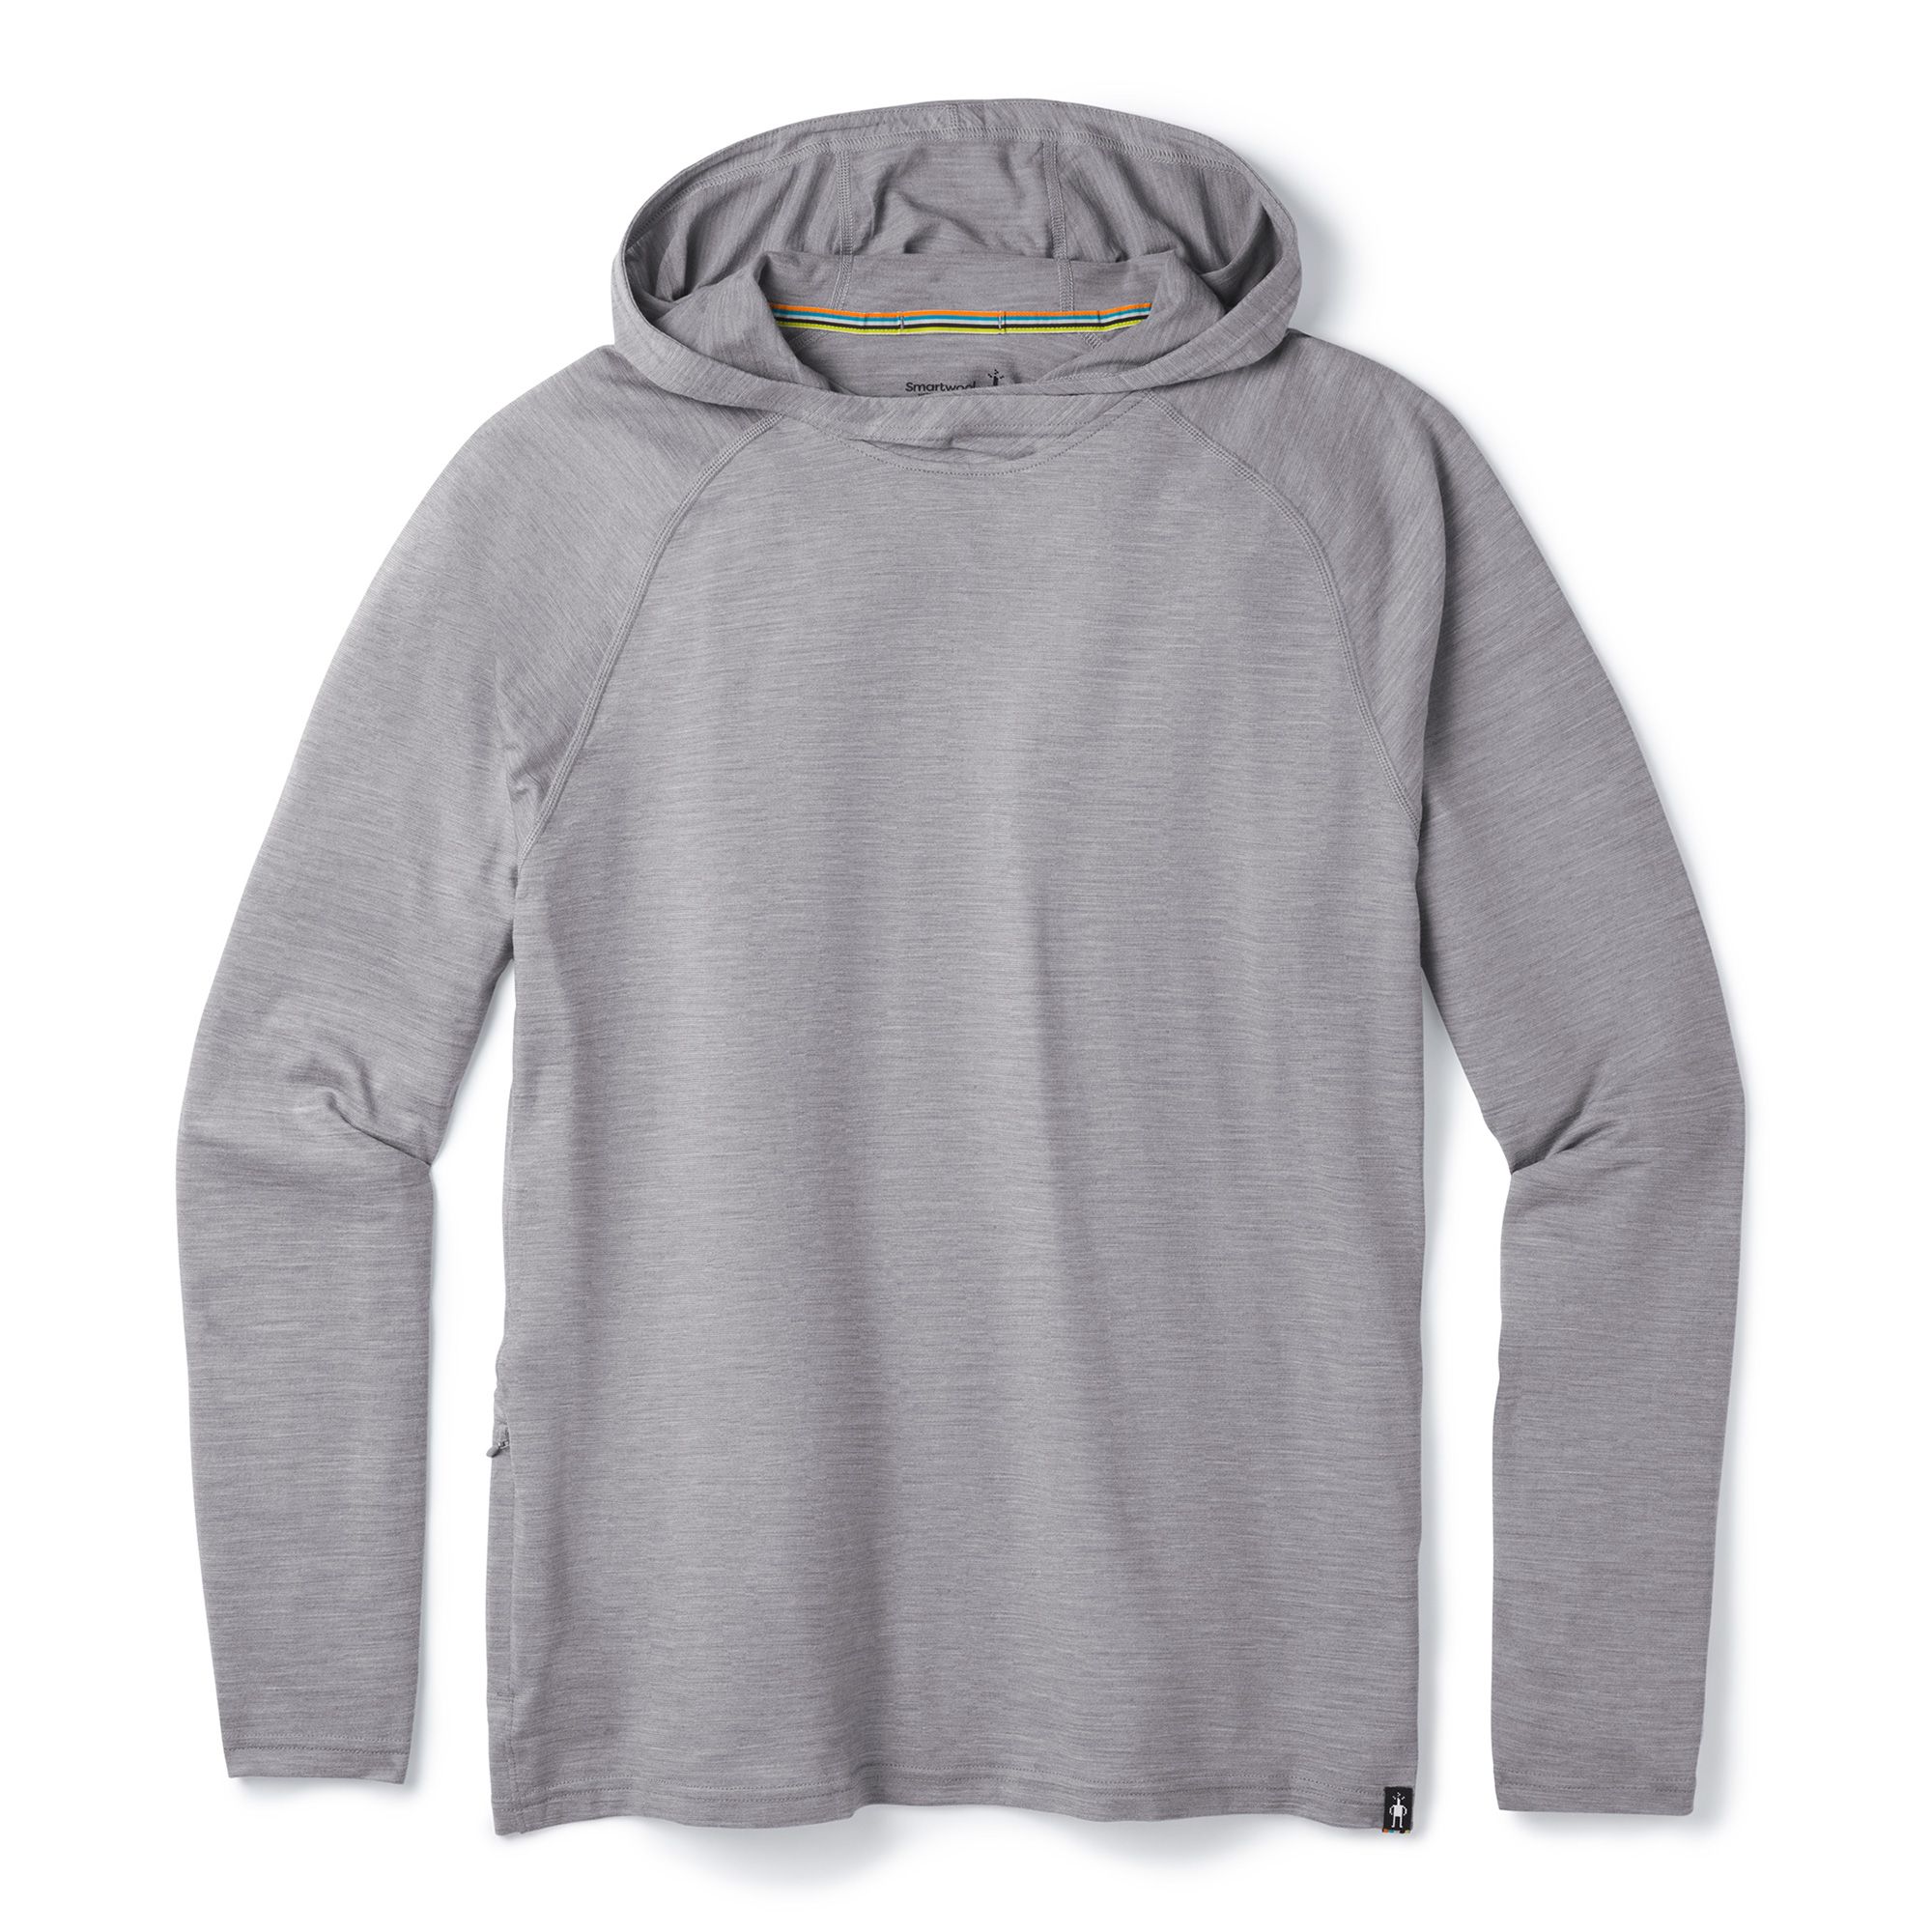 Smartwool Active Hoodie - Mens, FREE SHIPPING in Canada